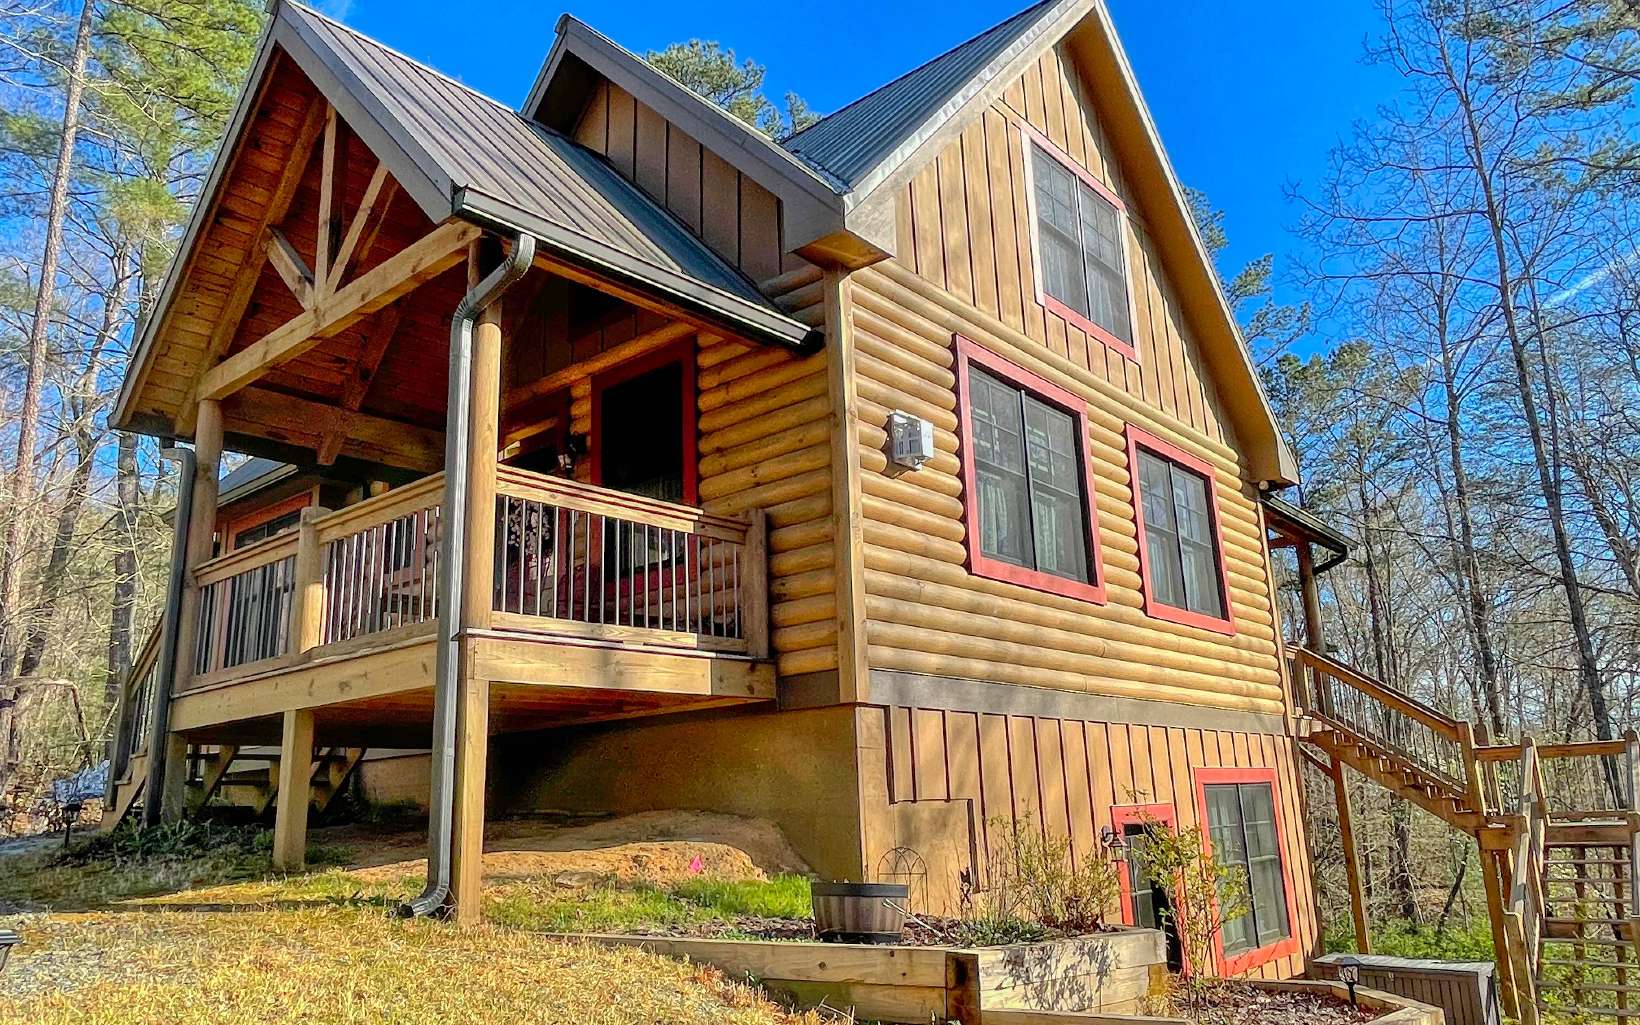 Lovely custom built log home in private farm setting, sitting on top of hill overlooking woods & pasture with seasonal Mountain View. Extra Room Upstairs could be Study/Office or 4th Bedroom. Home featured in Log Home Living Magazine in their annual 26 Best Floor Plan Issue. High Speed Internet, Unrestricted, STR Allowed but no rental history. Furnishings Negotiable.